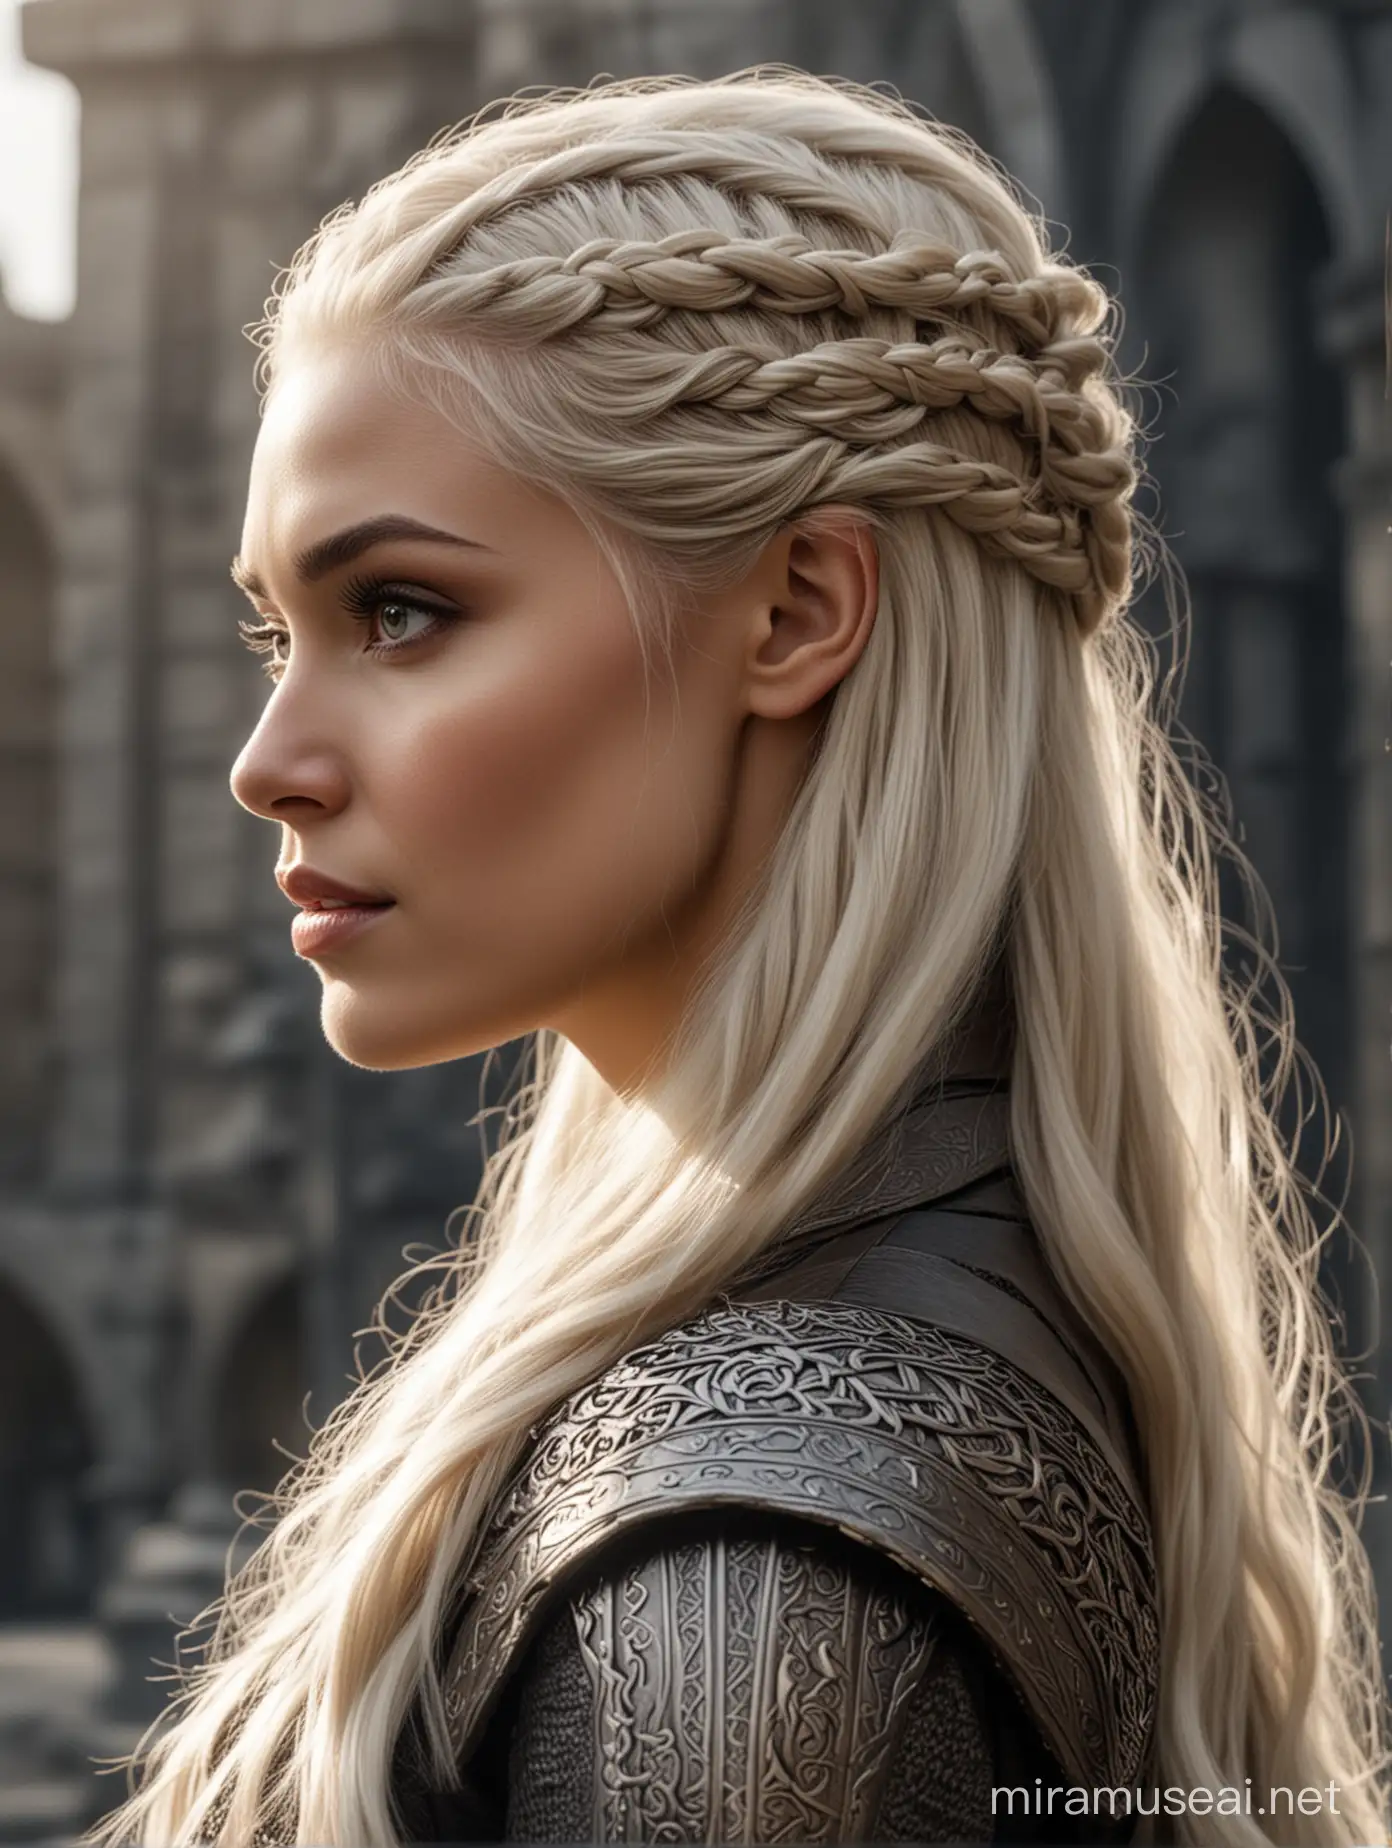 Elegant Valyrian Woman with Intricate Hairstyle